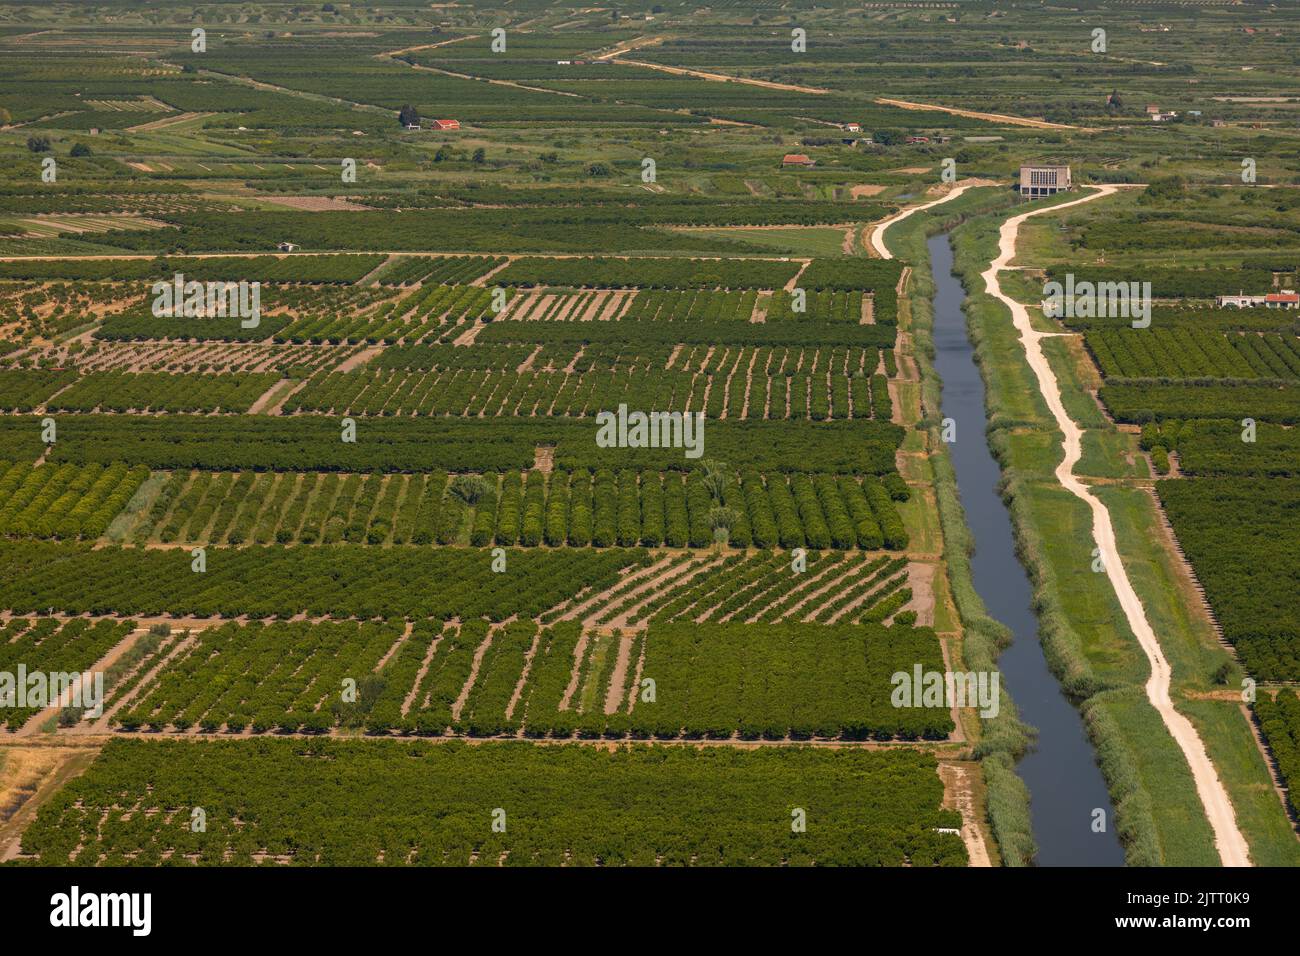 OPUZEN, NERETVA VALLEY, CROATIA, EUROPE - Agriculture and irrigation canals in the Neretva River Valley. Stock Photo